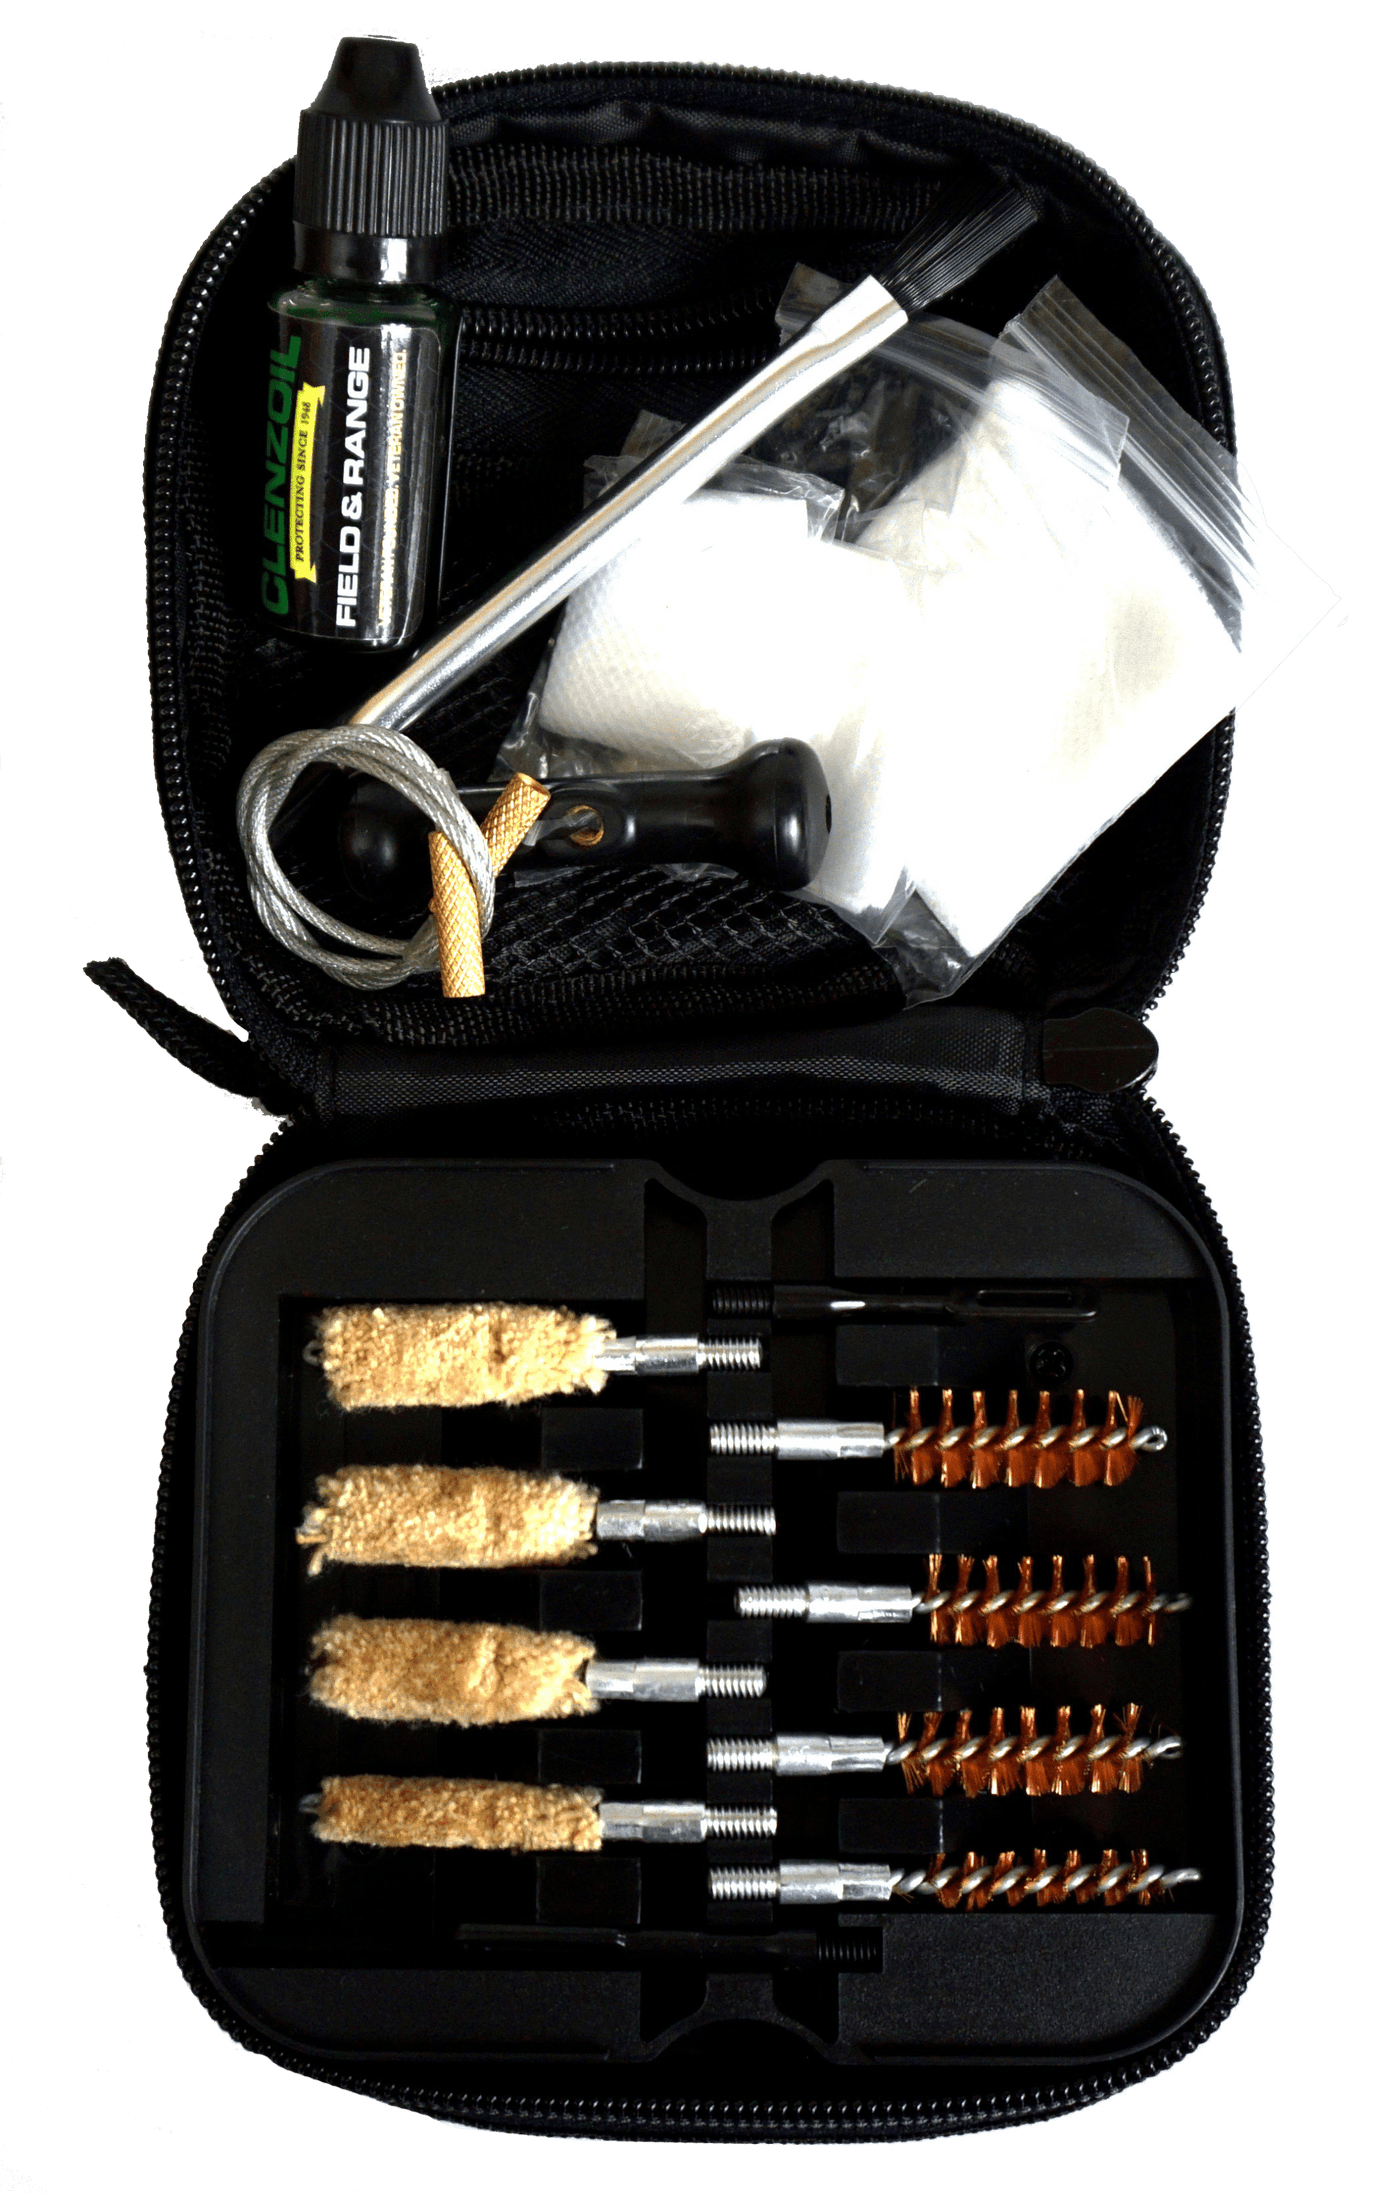 Clenzoil Clenzoil Pistol Cleaning Kit Black Shooting Gear and Acc